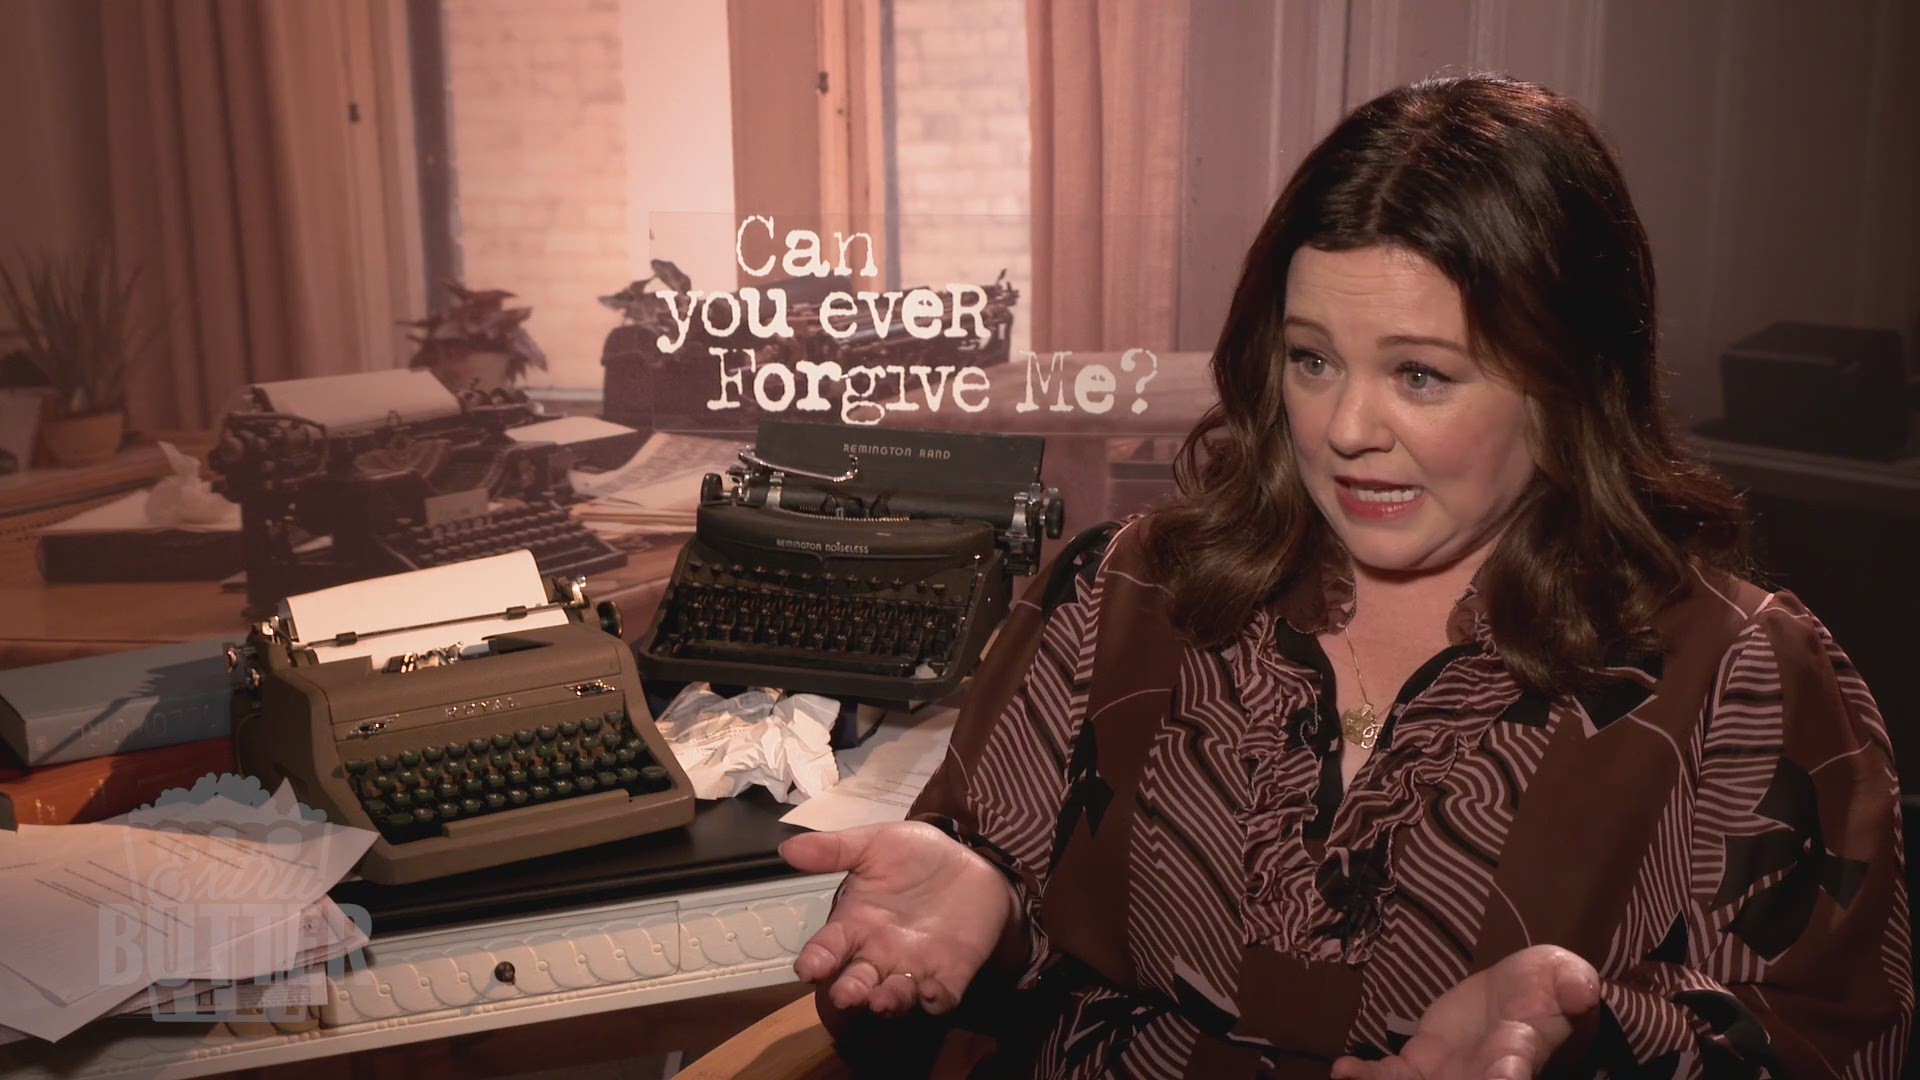 Melissa McCarthy talks about portraying celebrity biographer Lee Israel in her new movie, 'Can you ever forgive me?' Kelly Savanna Deaton of Extra Butter also gets Melissa to reminisce about her time in New York and share details of her worst jobs, includ